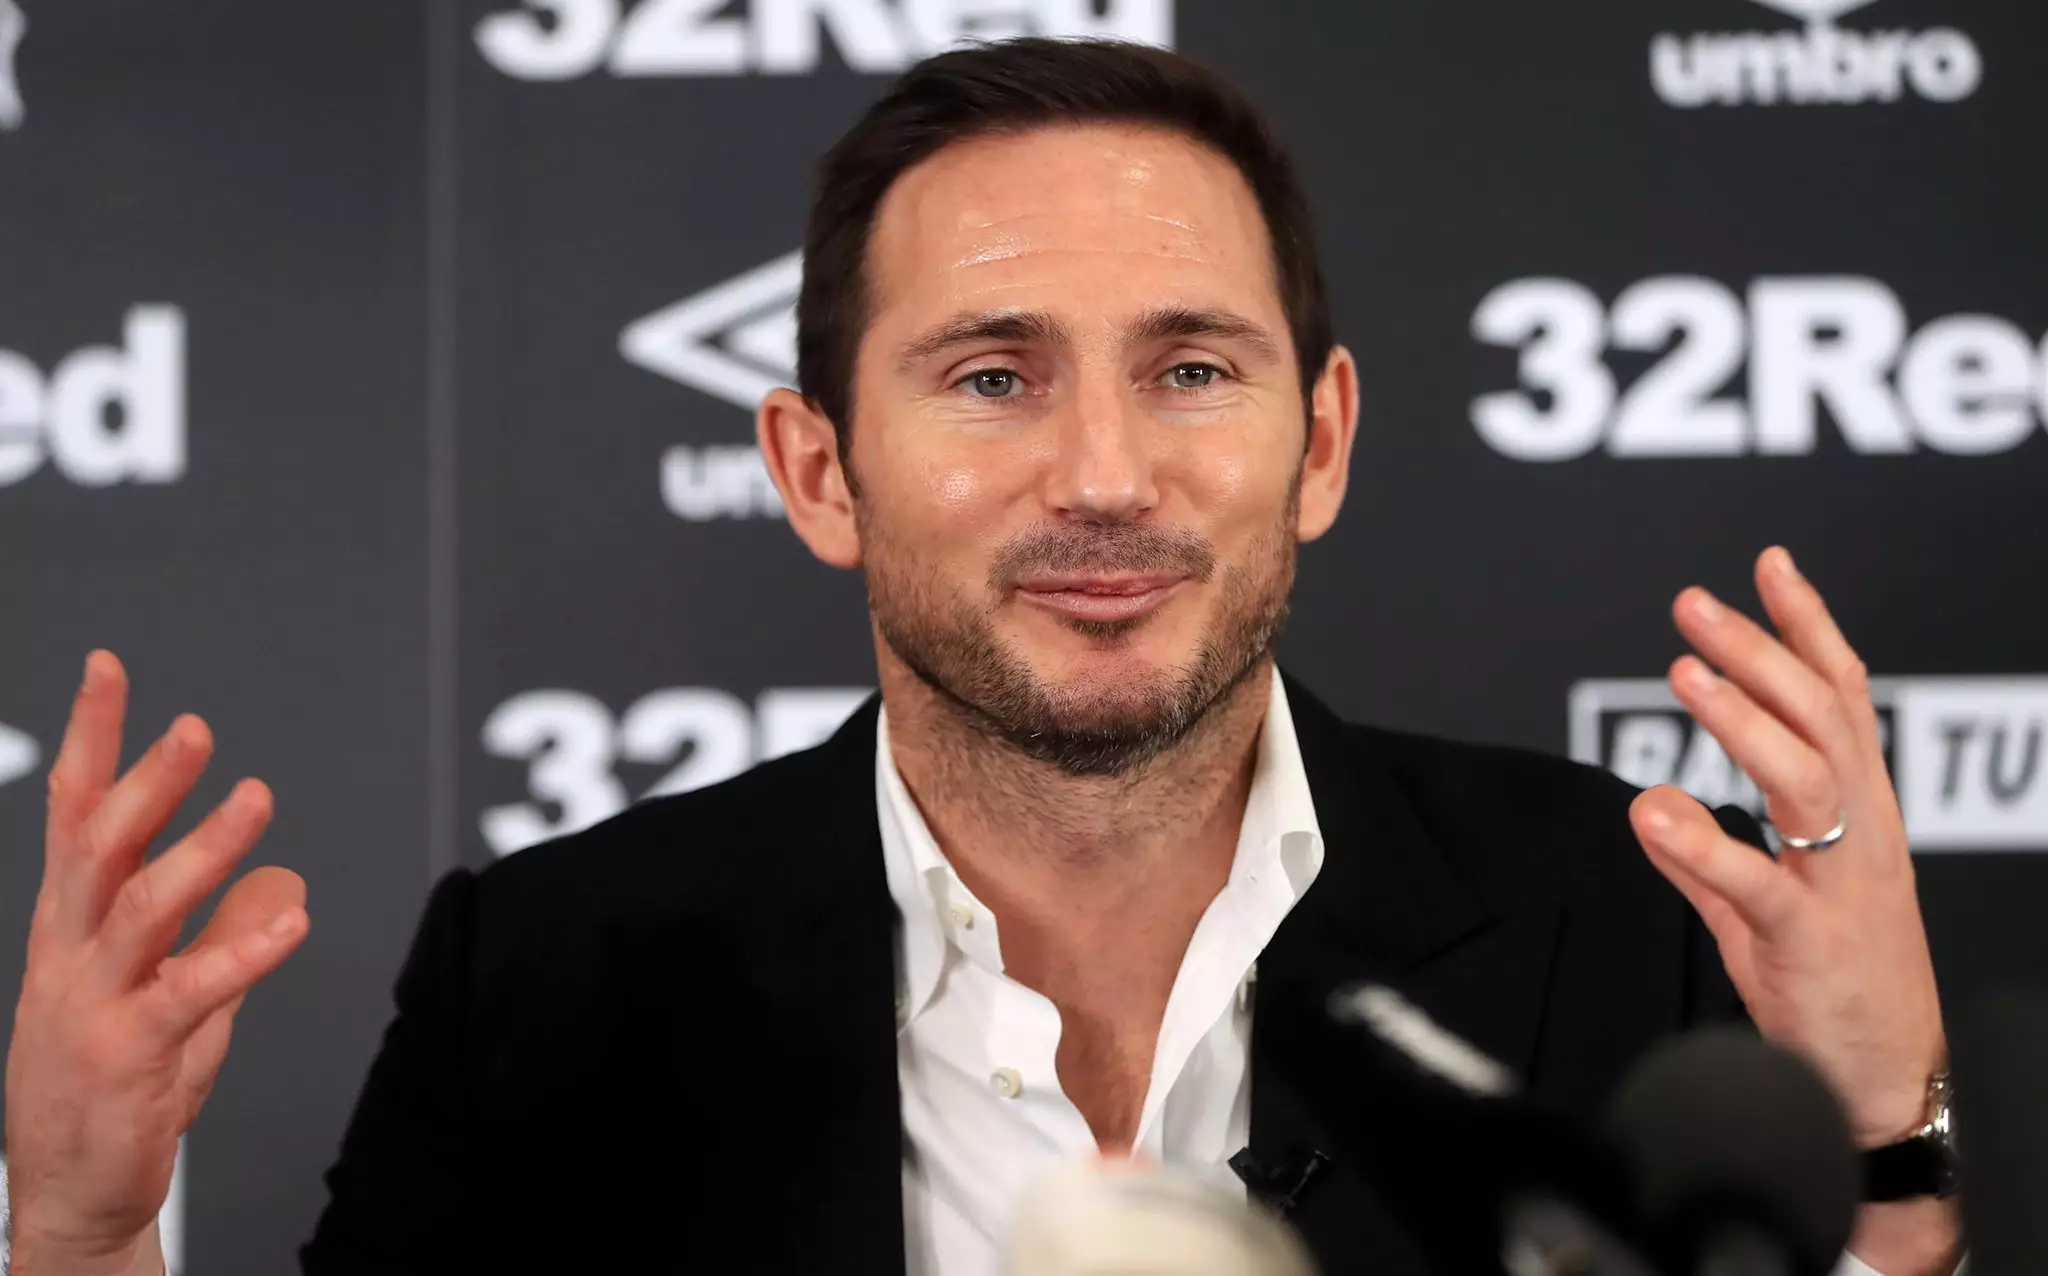 Lampard is now manager of Derby. Image: PA Images